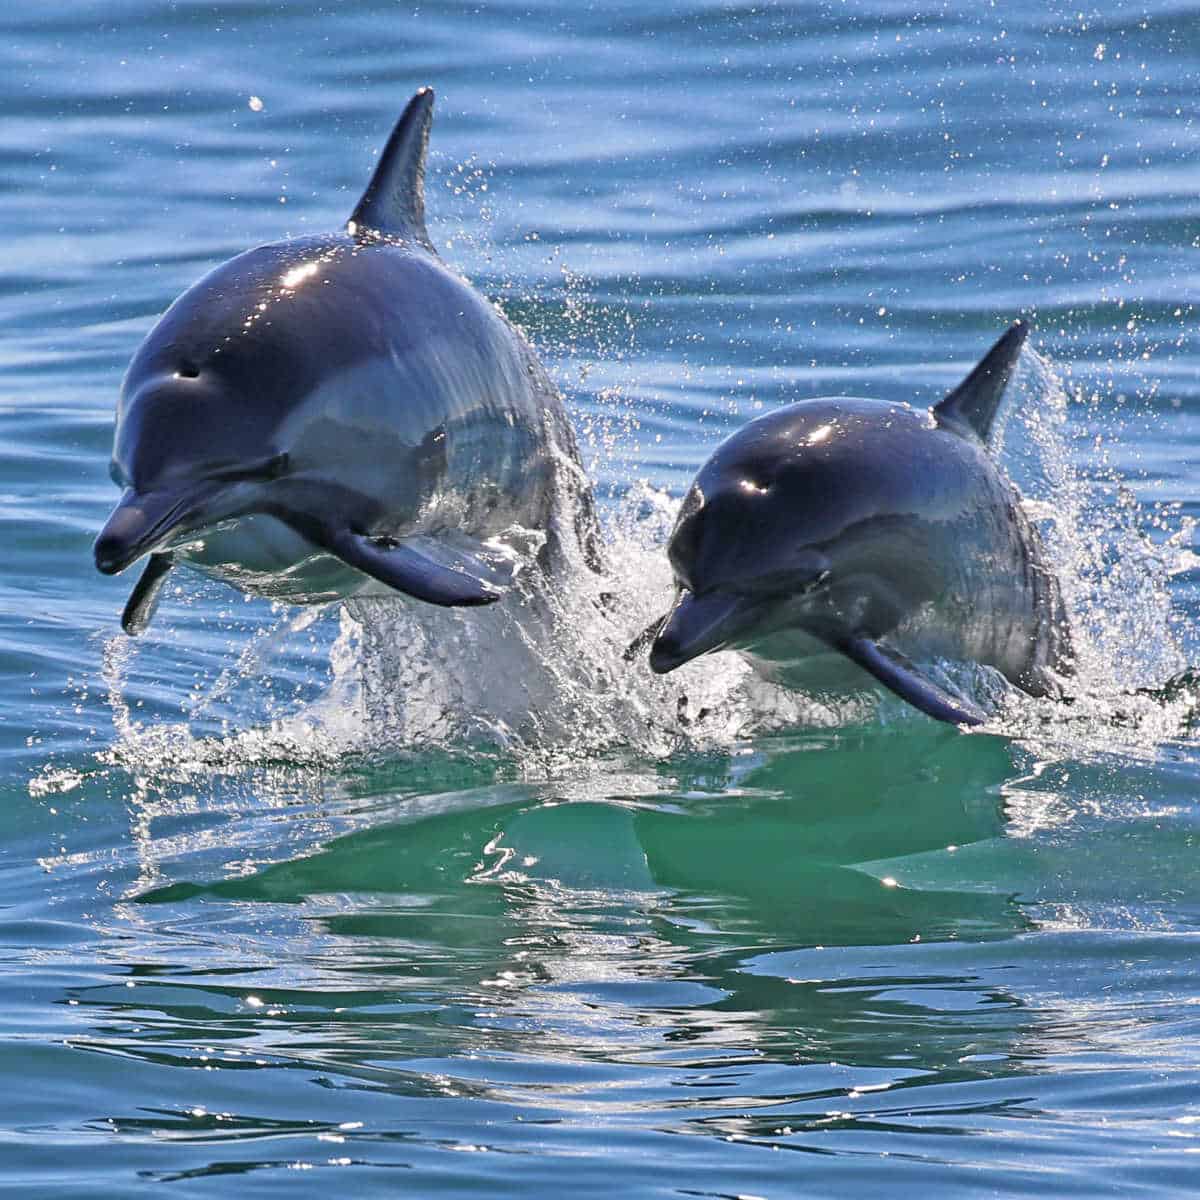 Dolphins in California National Parks - Channel Islands National Park